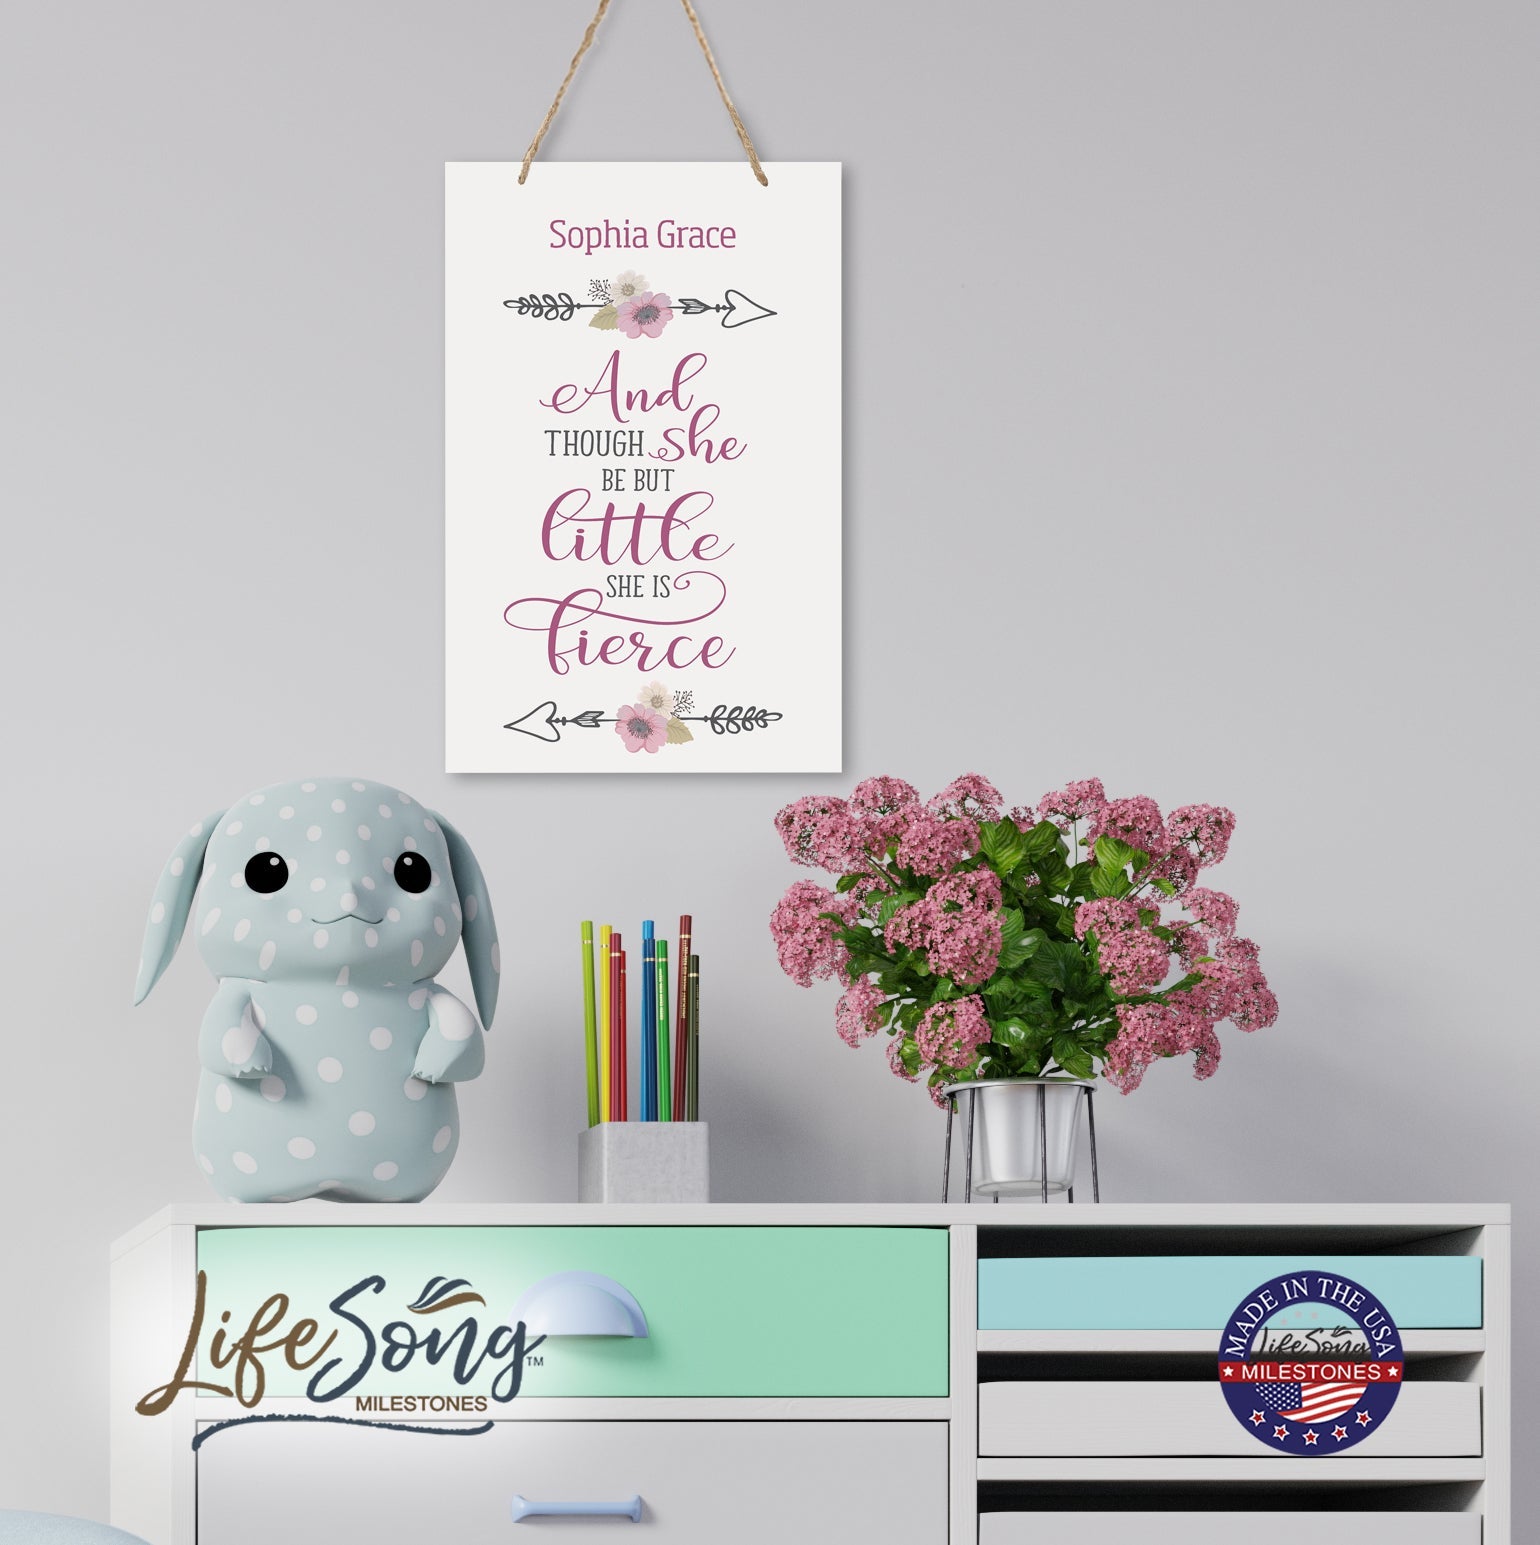 Personalized Wall Decor For Nursery Girls Bedroom Hanging Wall Art - LifeSong Milestones